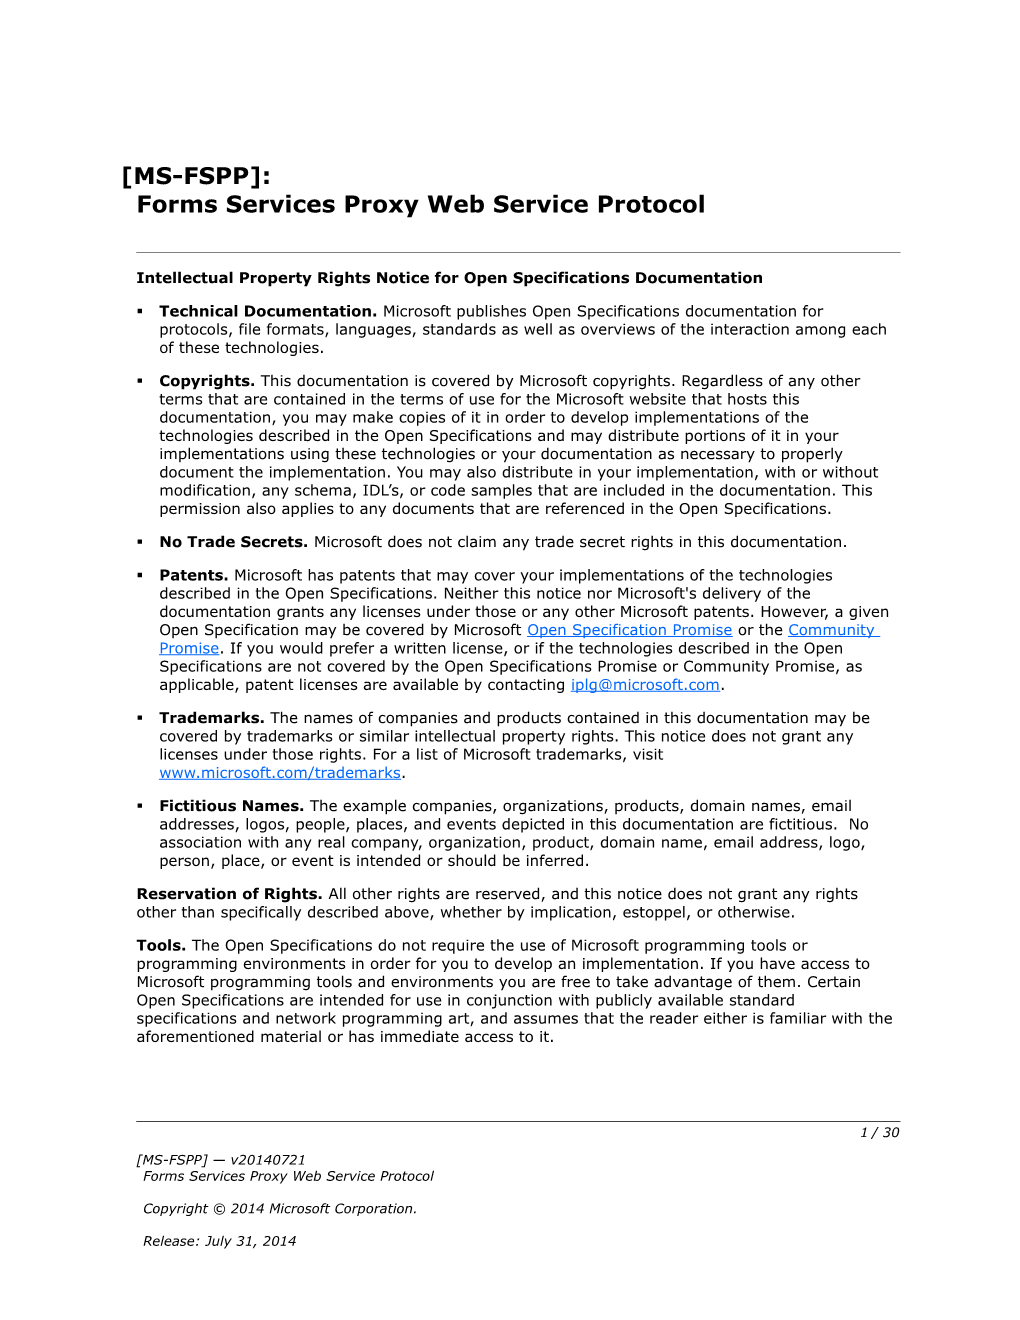 Intellectual Property Rights Notice for Open Specifications Documentation s109